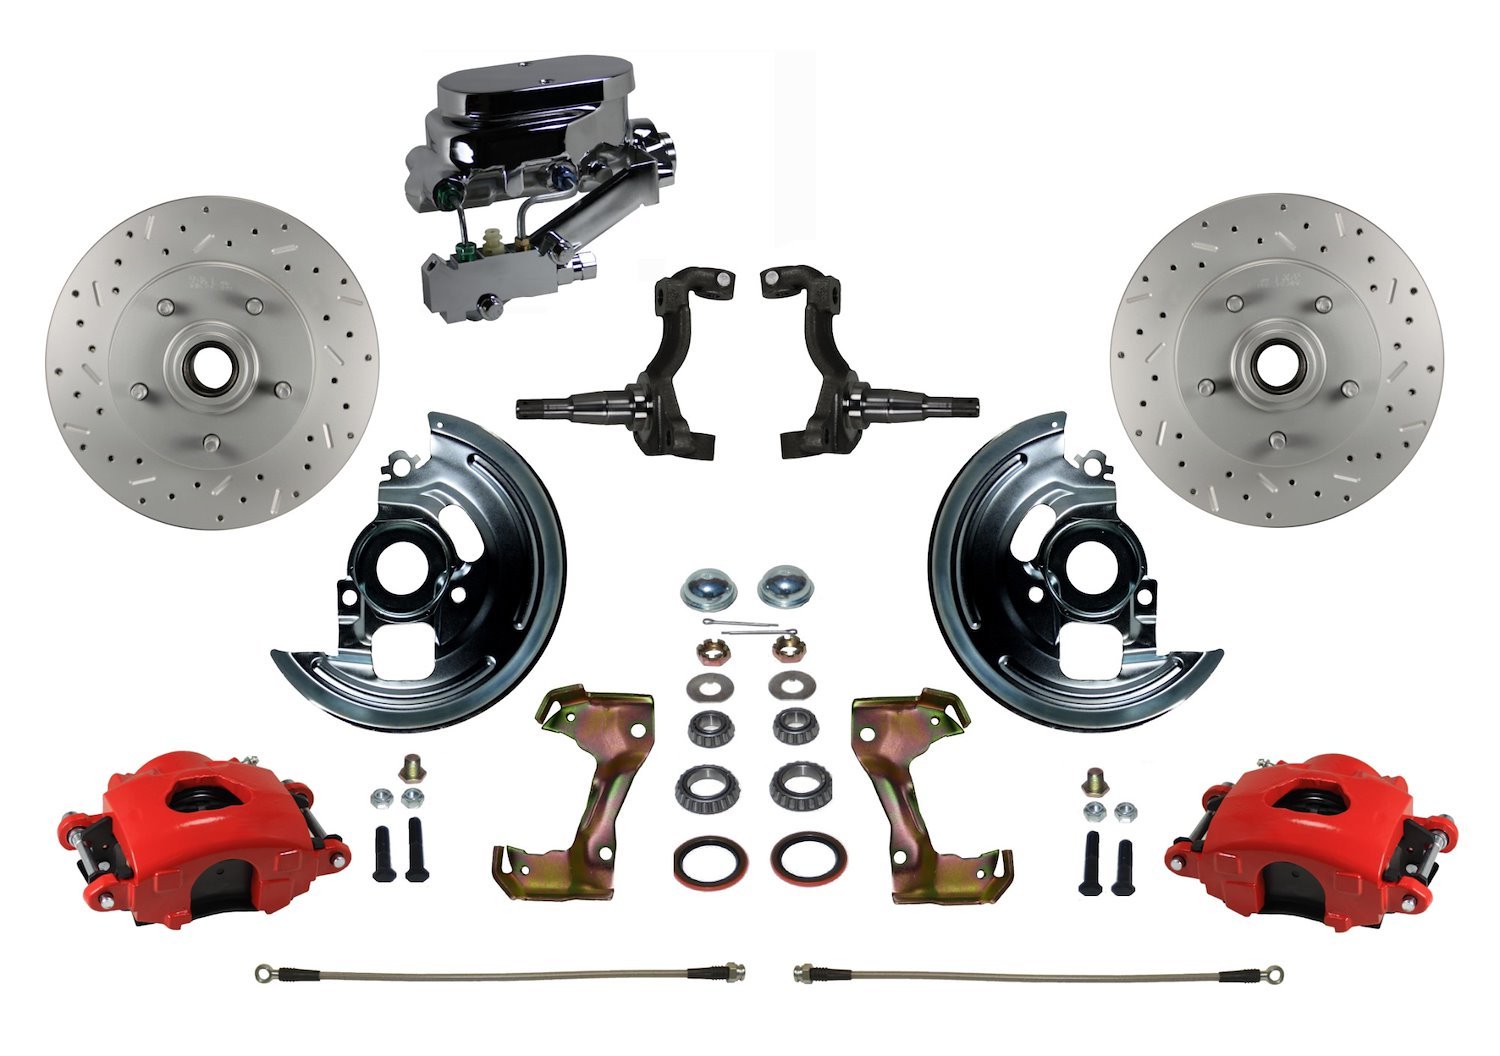 Chevy II/Nova Front Disc Brake Conversion Kit w/Stock Height Spindles